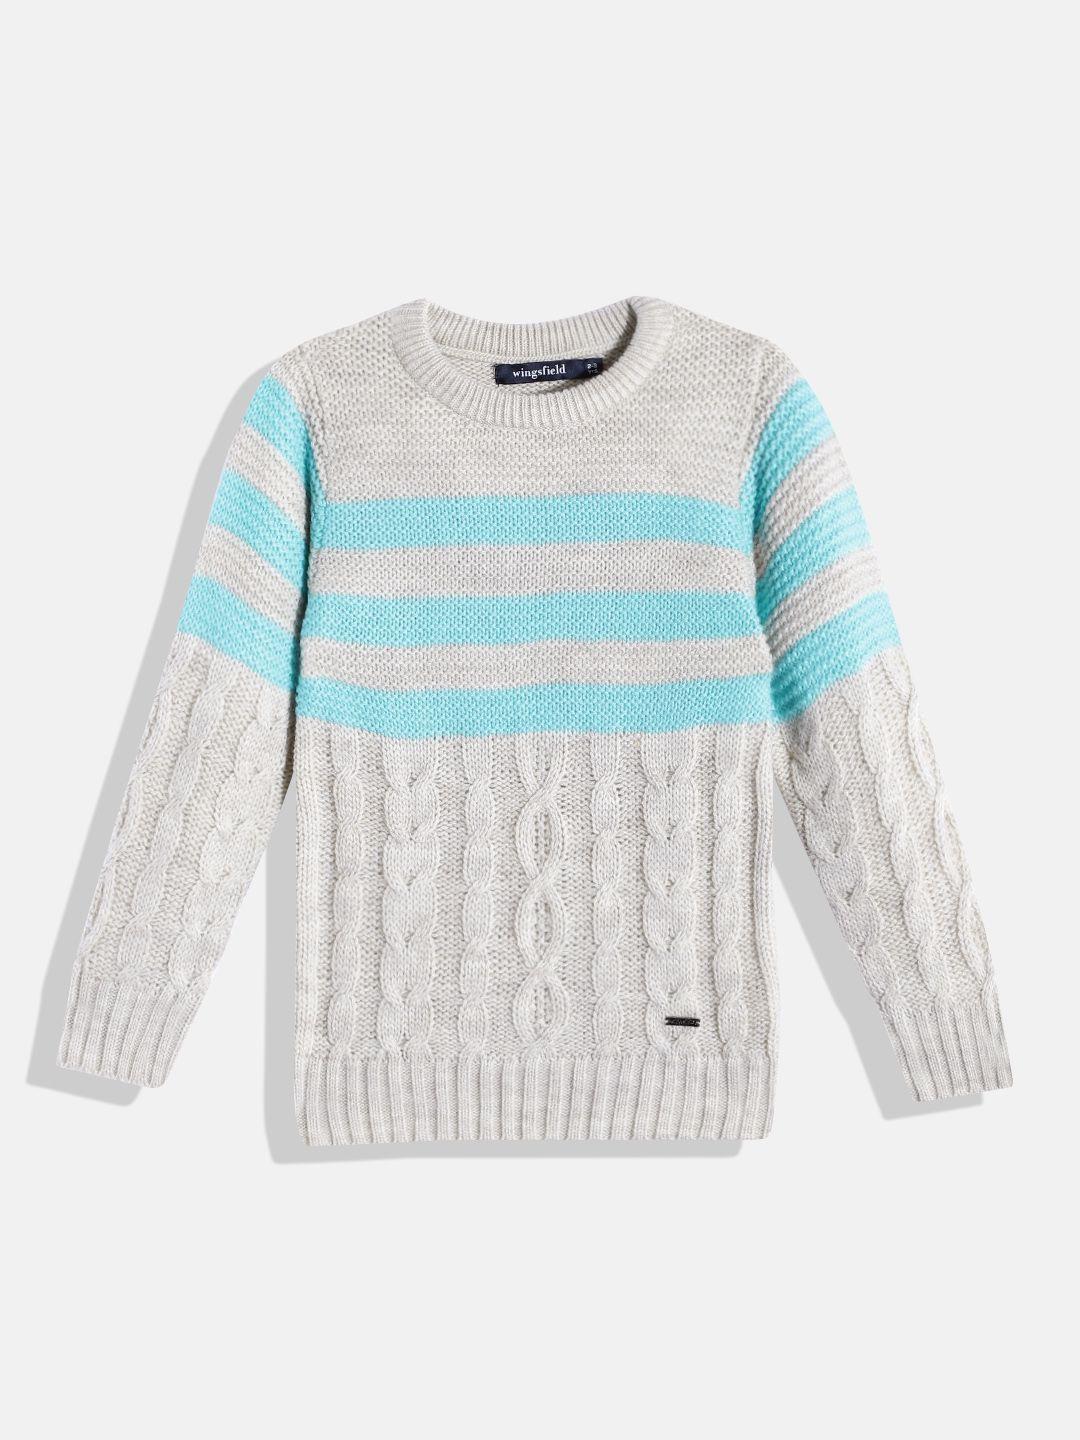 wingsfield boys grey & blue cable knit striped pullover